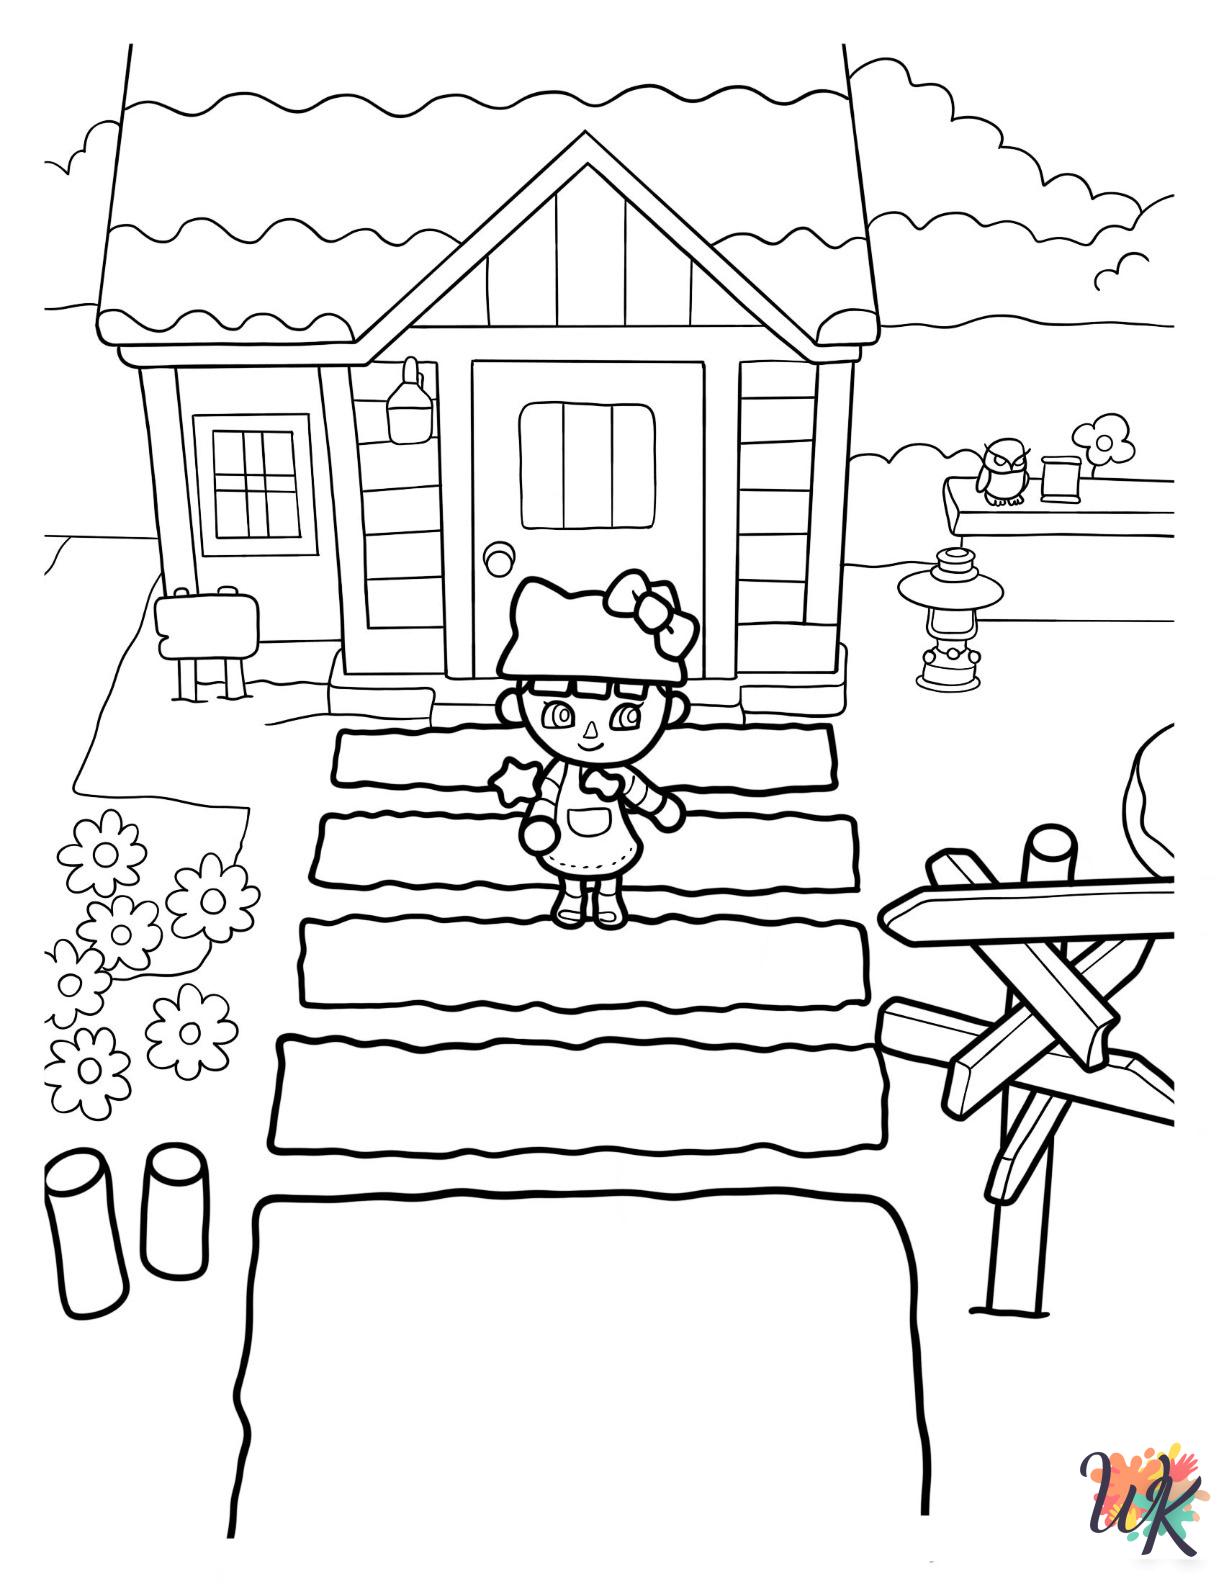 grinch cute Animal Crossing coloring pages